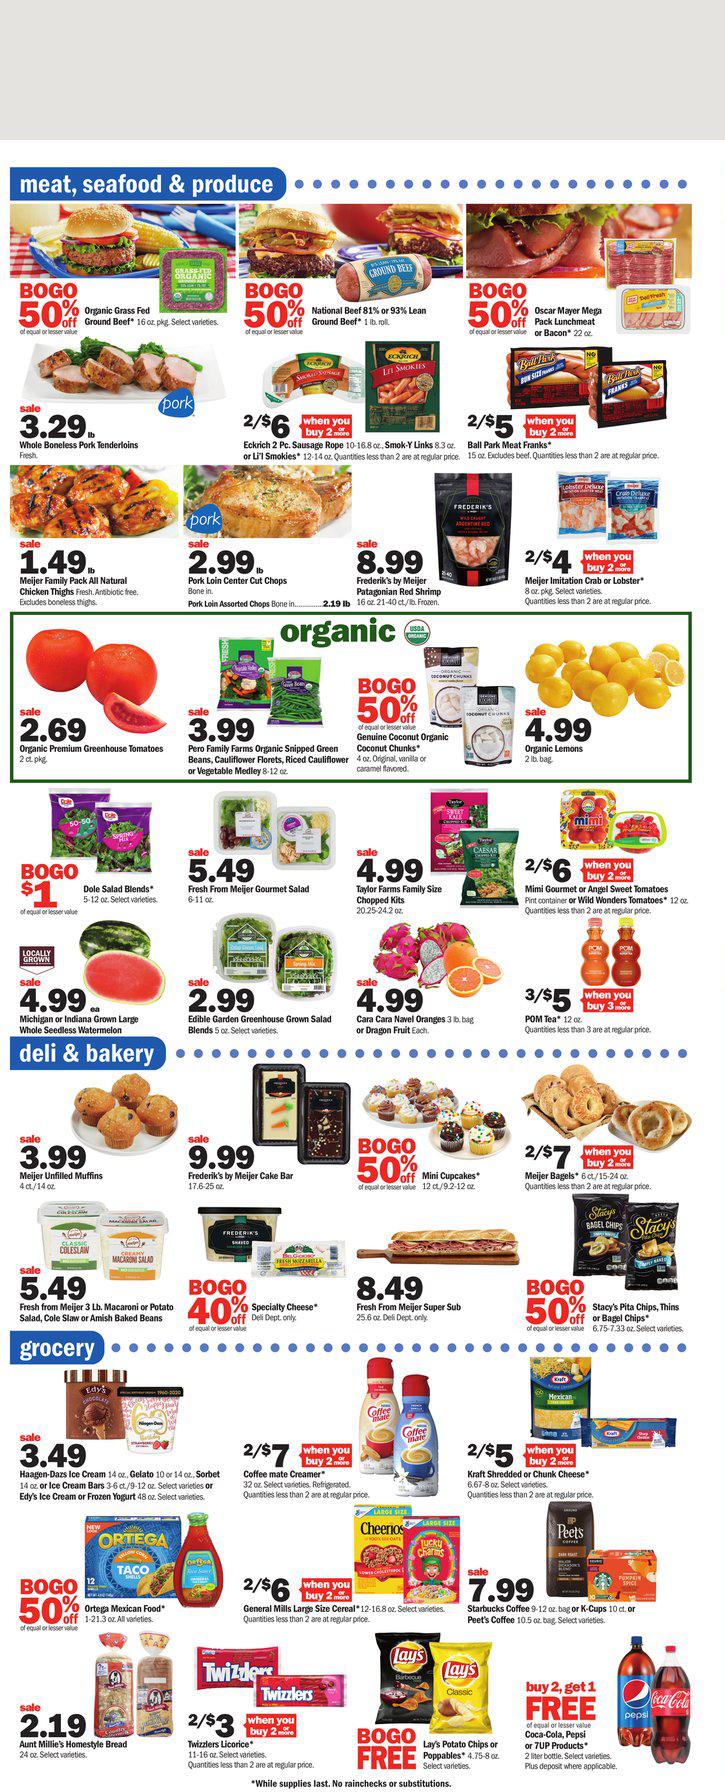 07.08.2022 Meijer ad 4. page